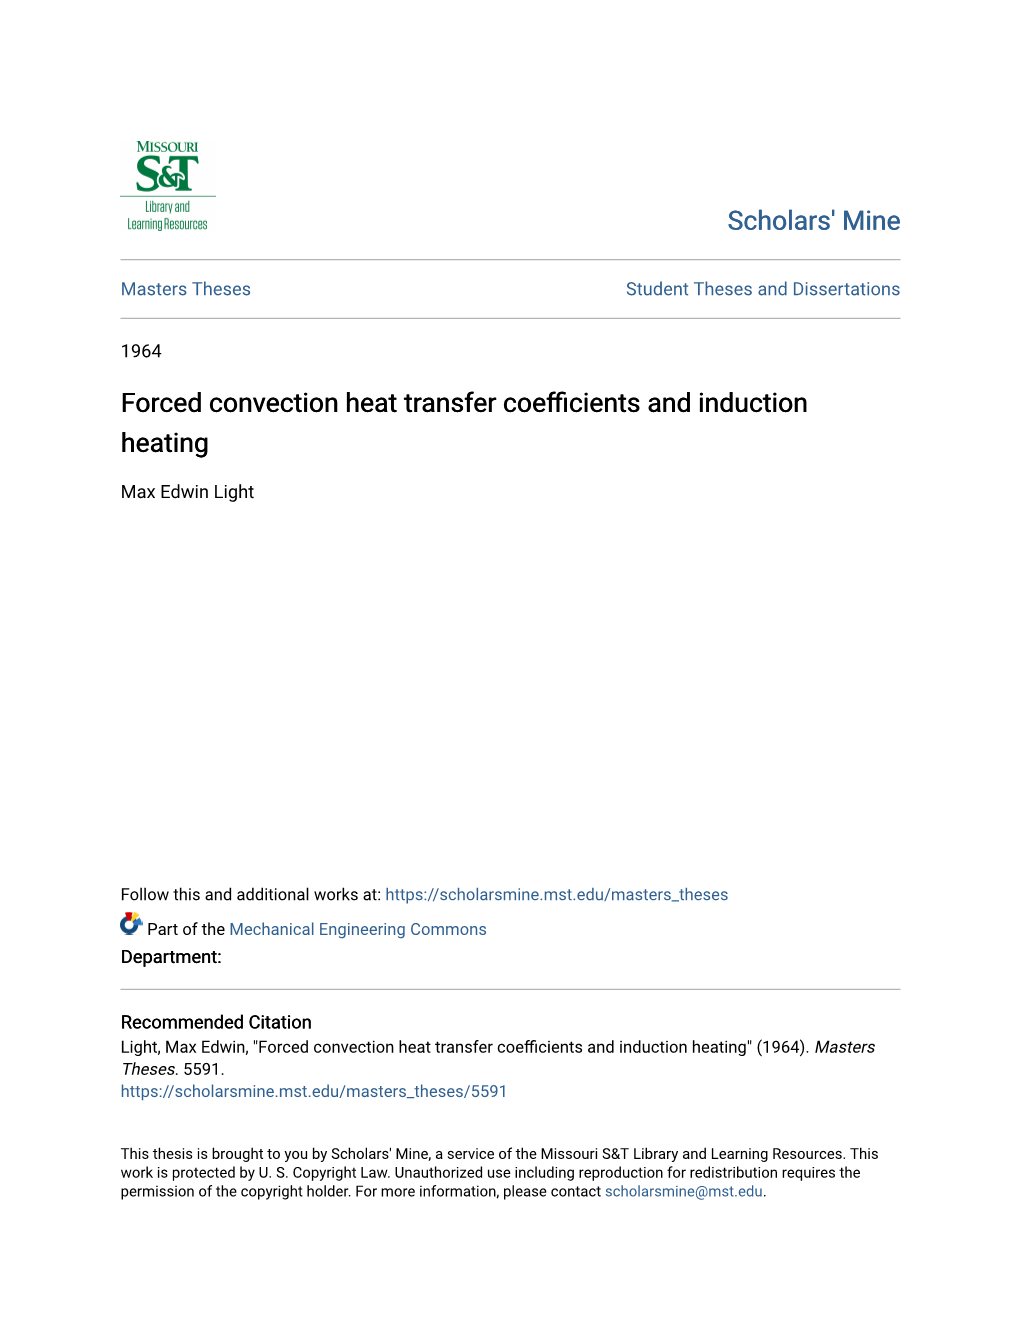 Forced Convection Heat Transfer Coefficients and Induction Heating